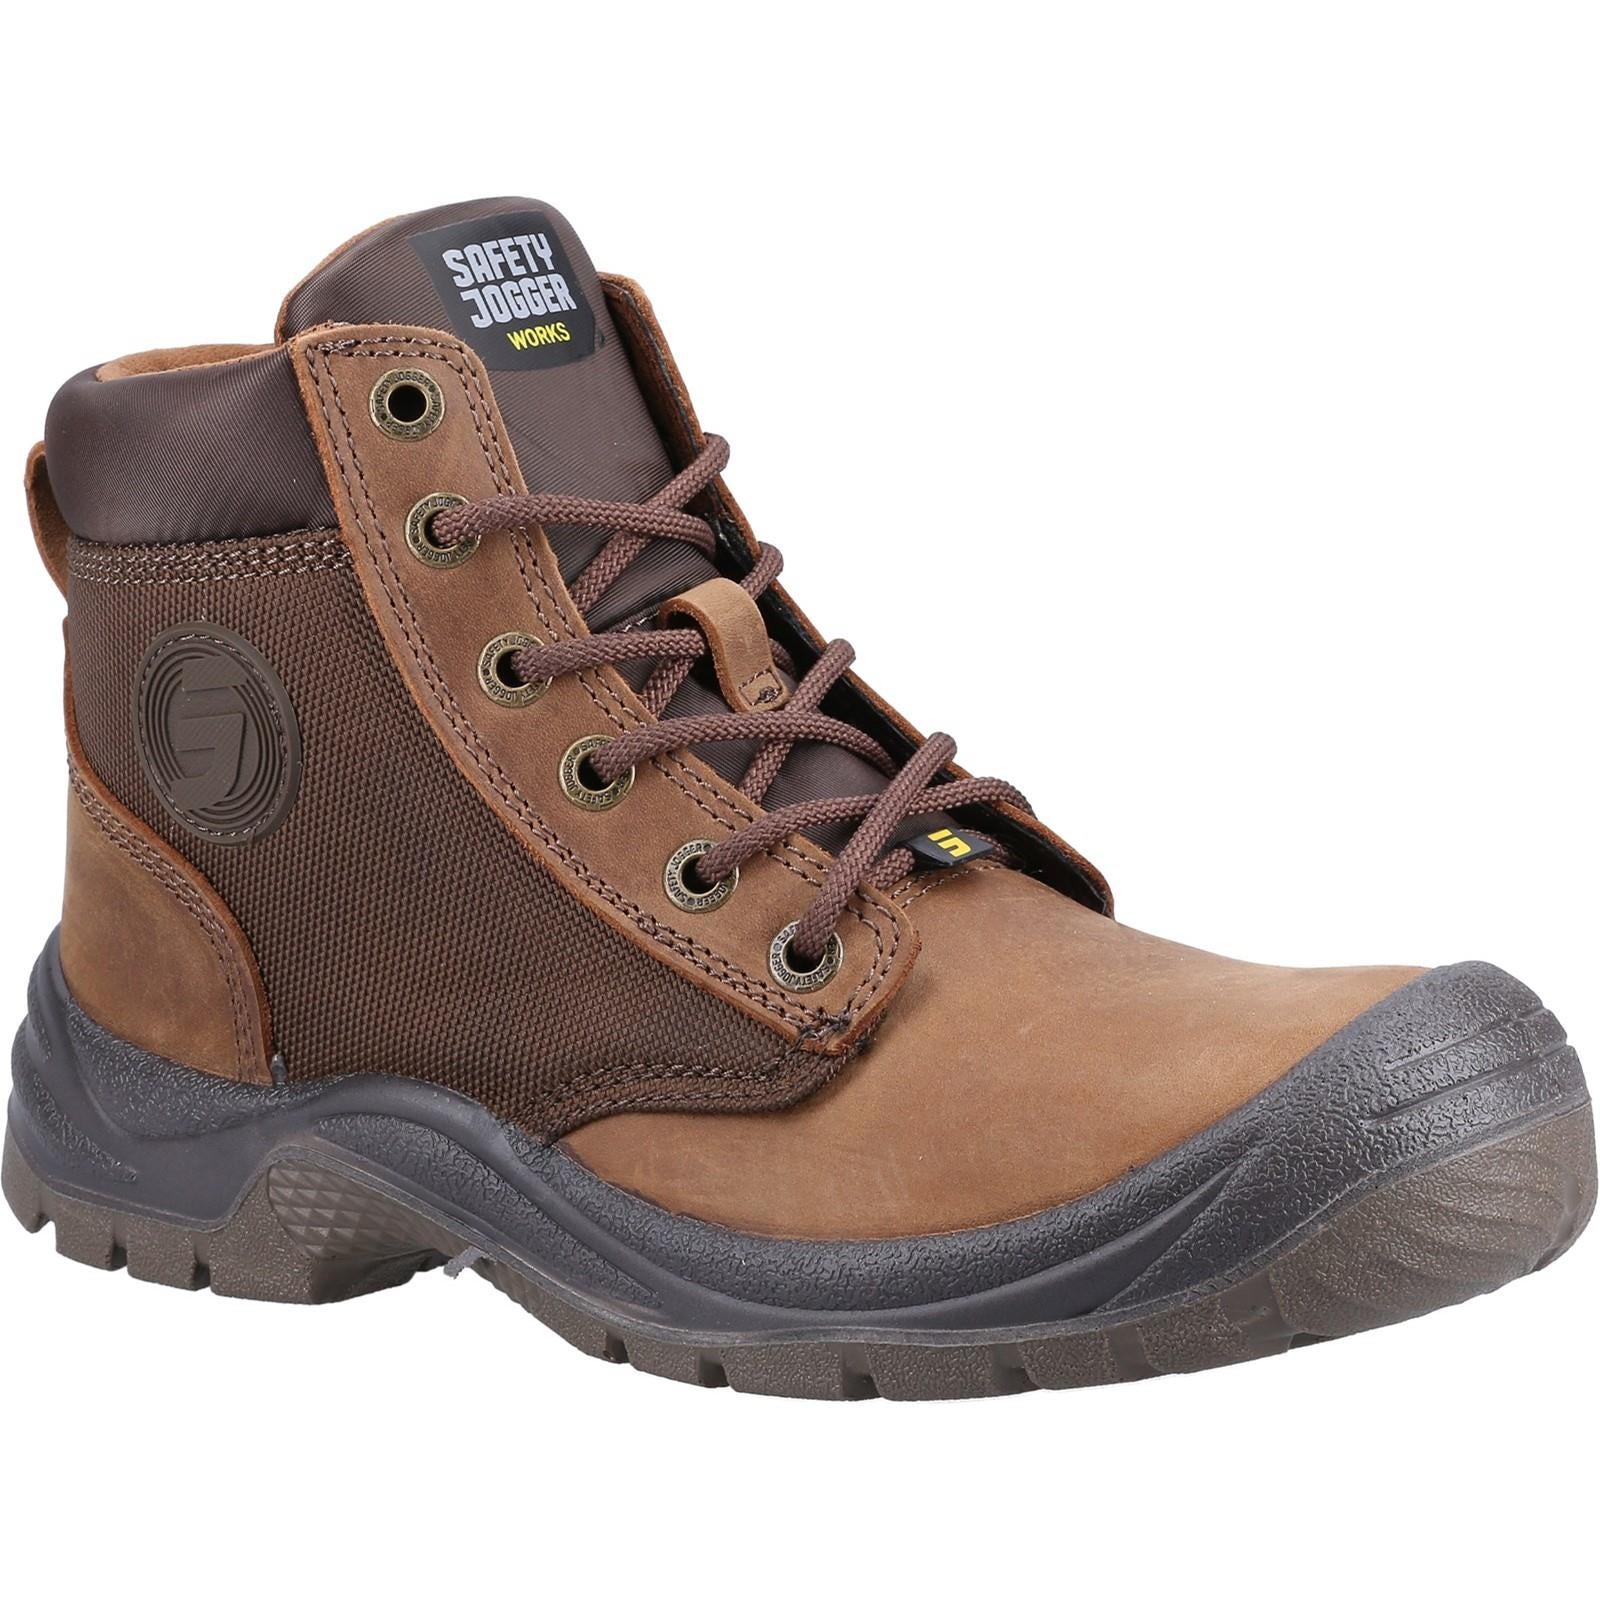 Safety Jogger Dakar S3 brown water resistant steel toe/midsole work safety boots